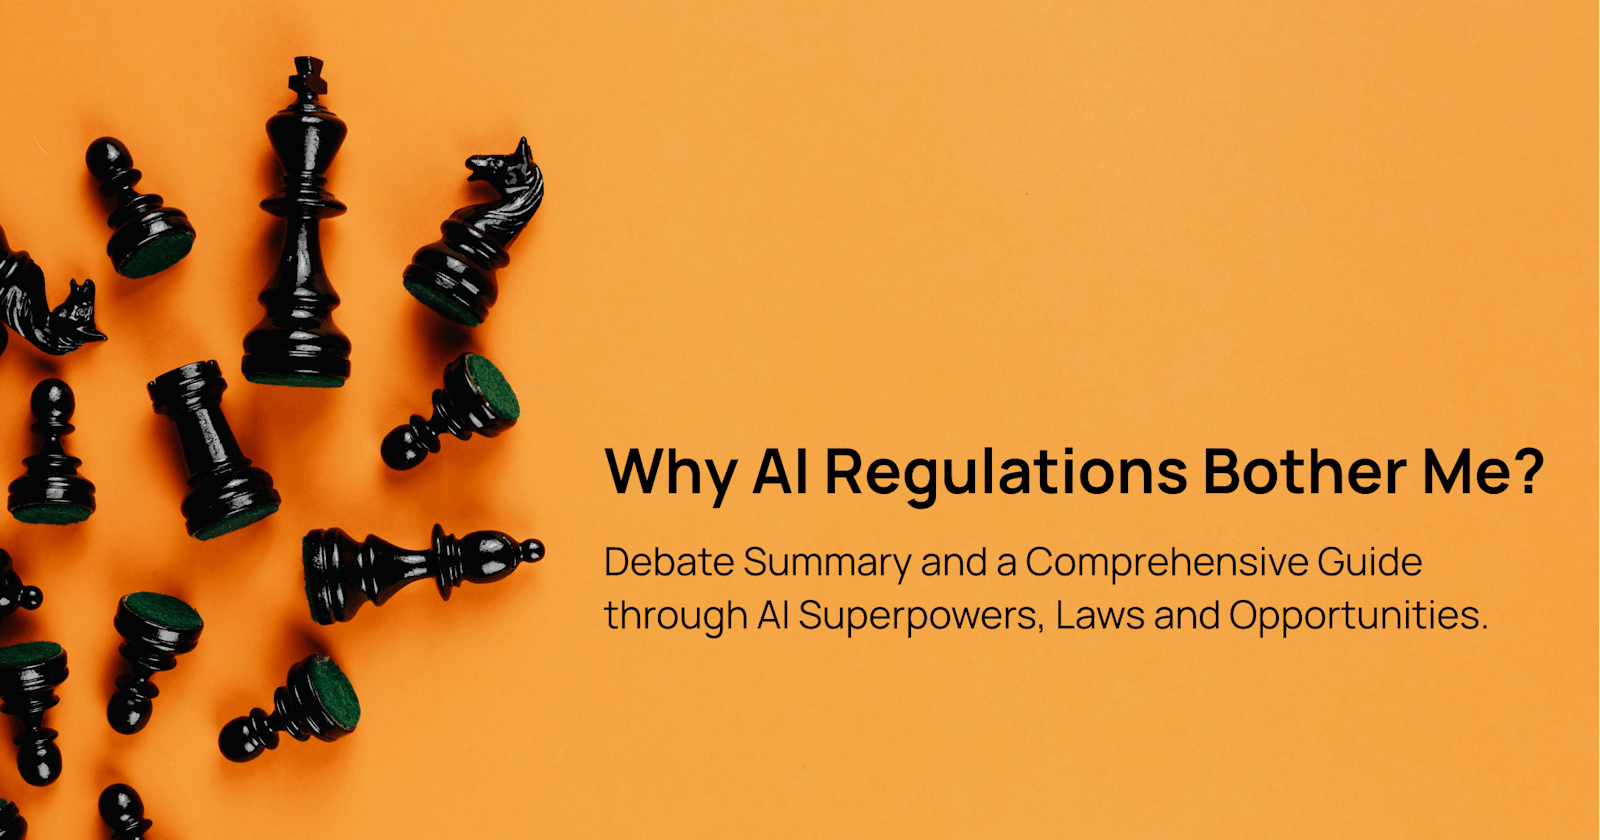 Why AI Regulations Bother Me?